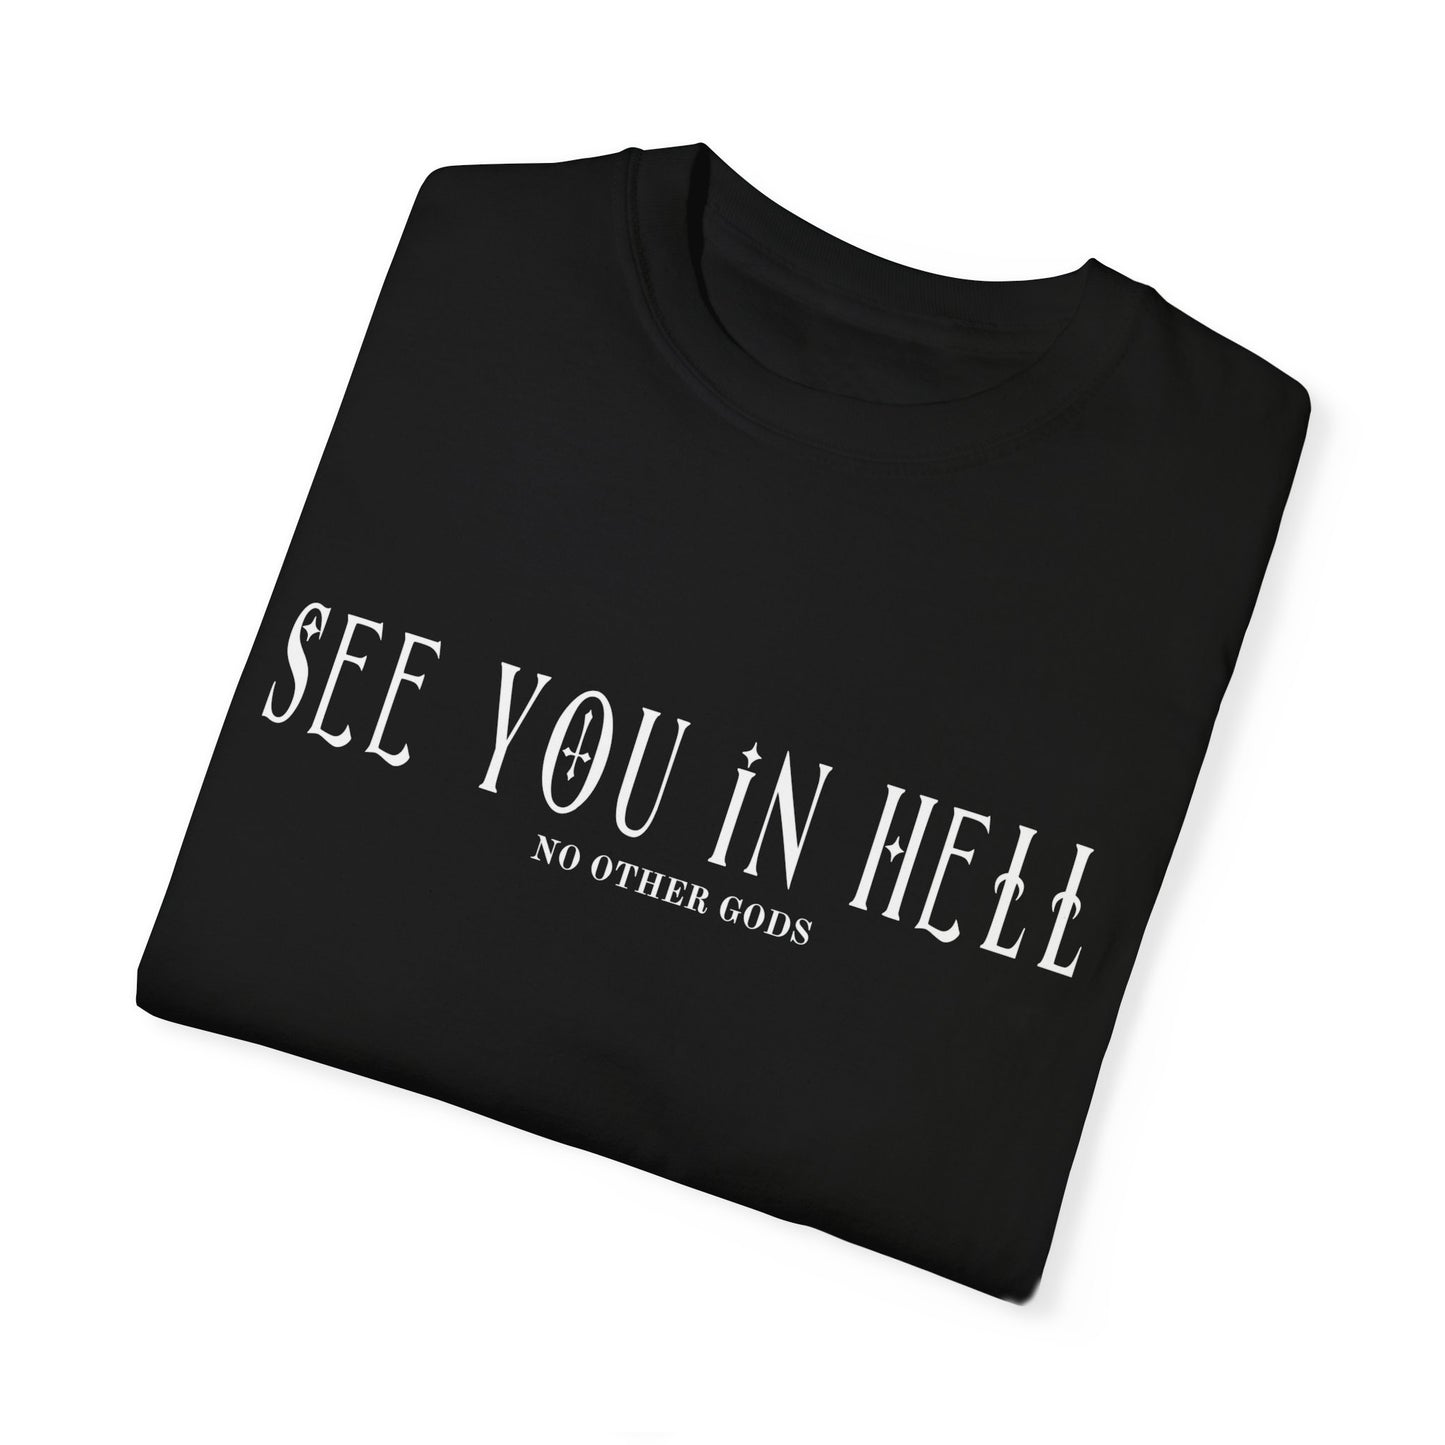 #see you in hell // PREMIUM TEE